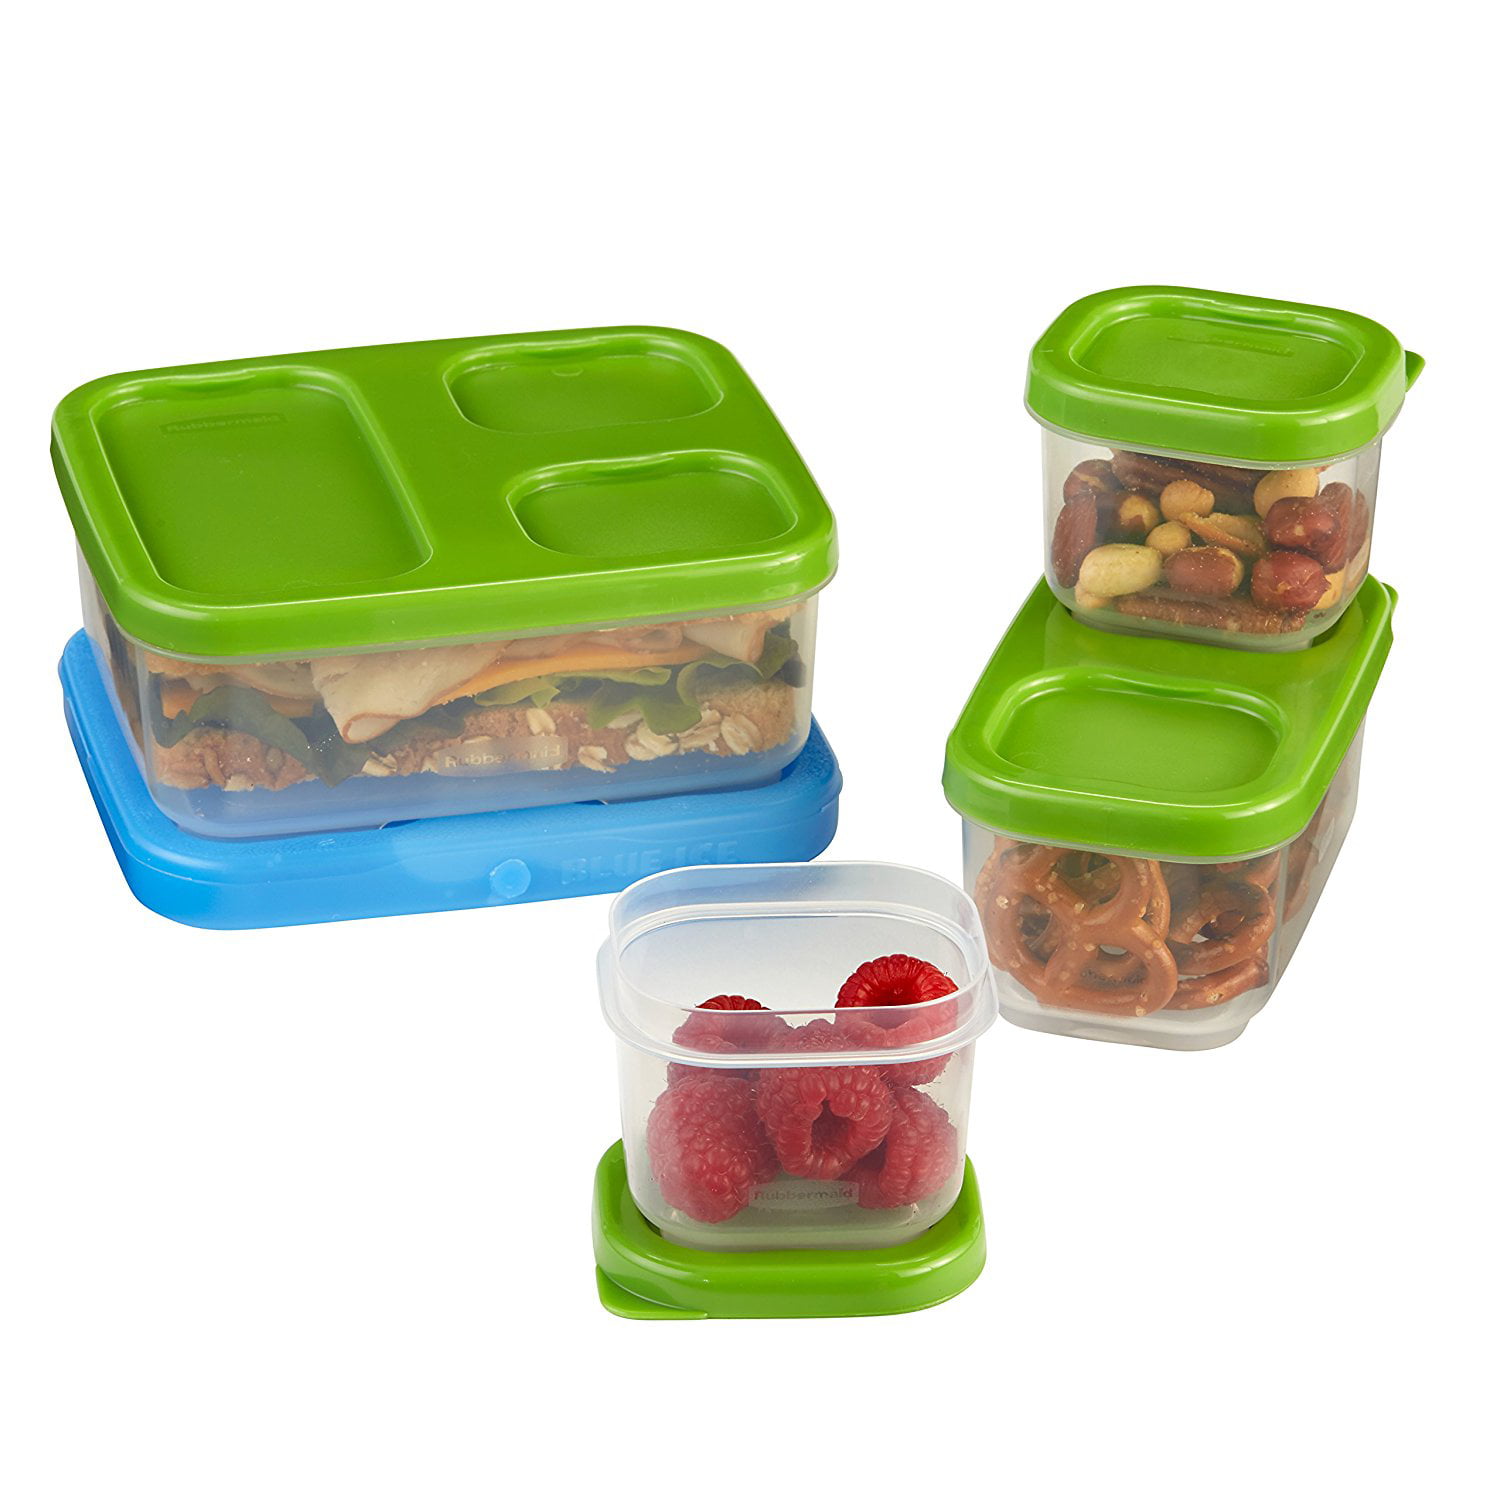 Pack of 6 Food Storage Sandwich Containers, 2 cups / 16 oz / 490 ml - 3  Different Designs. Great for Meal Prep. Kids or Adult Lunch Box - BPA Free  and